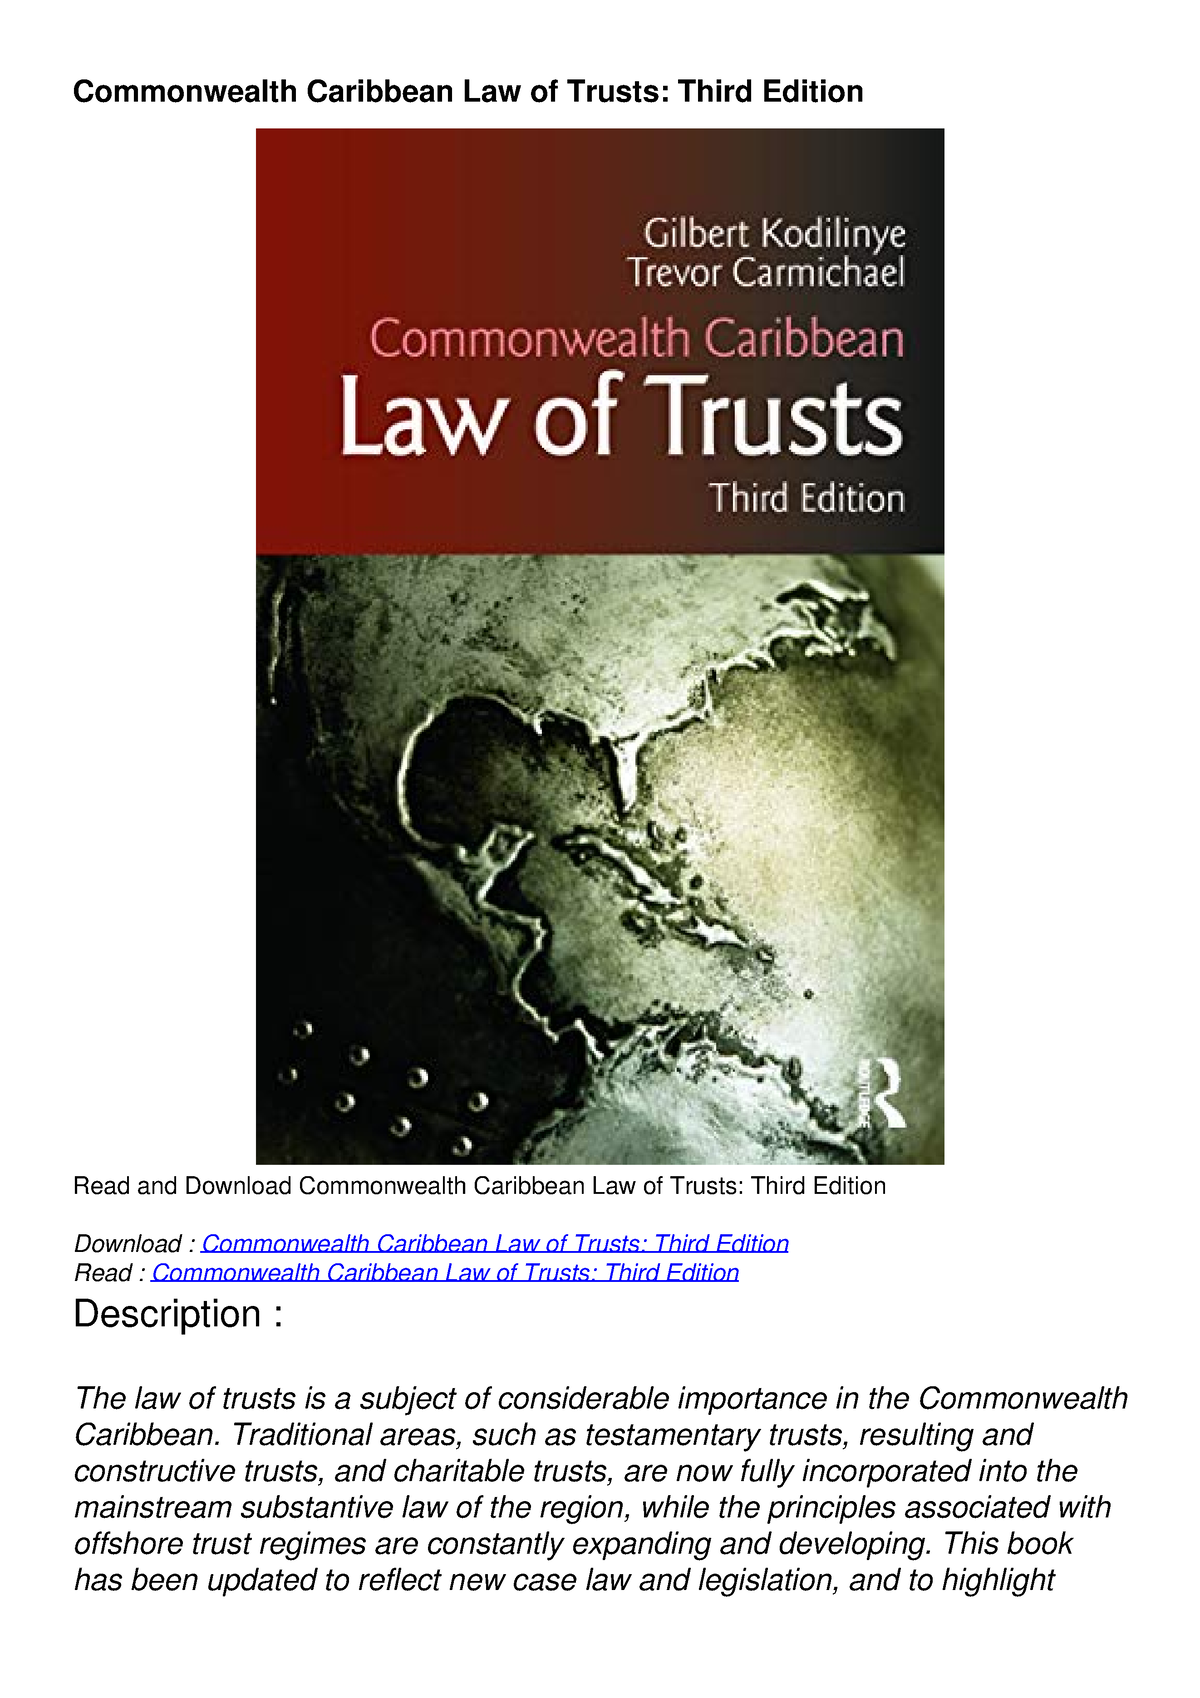 Download Book Pdf Commonwealth Caribbean Law Of Trusts Third Edition Commonwealth Caribbean 